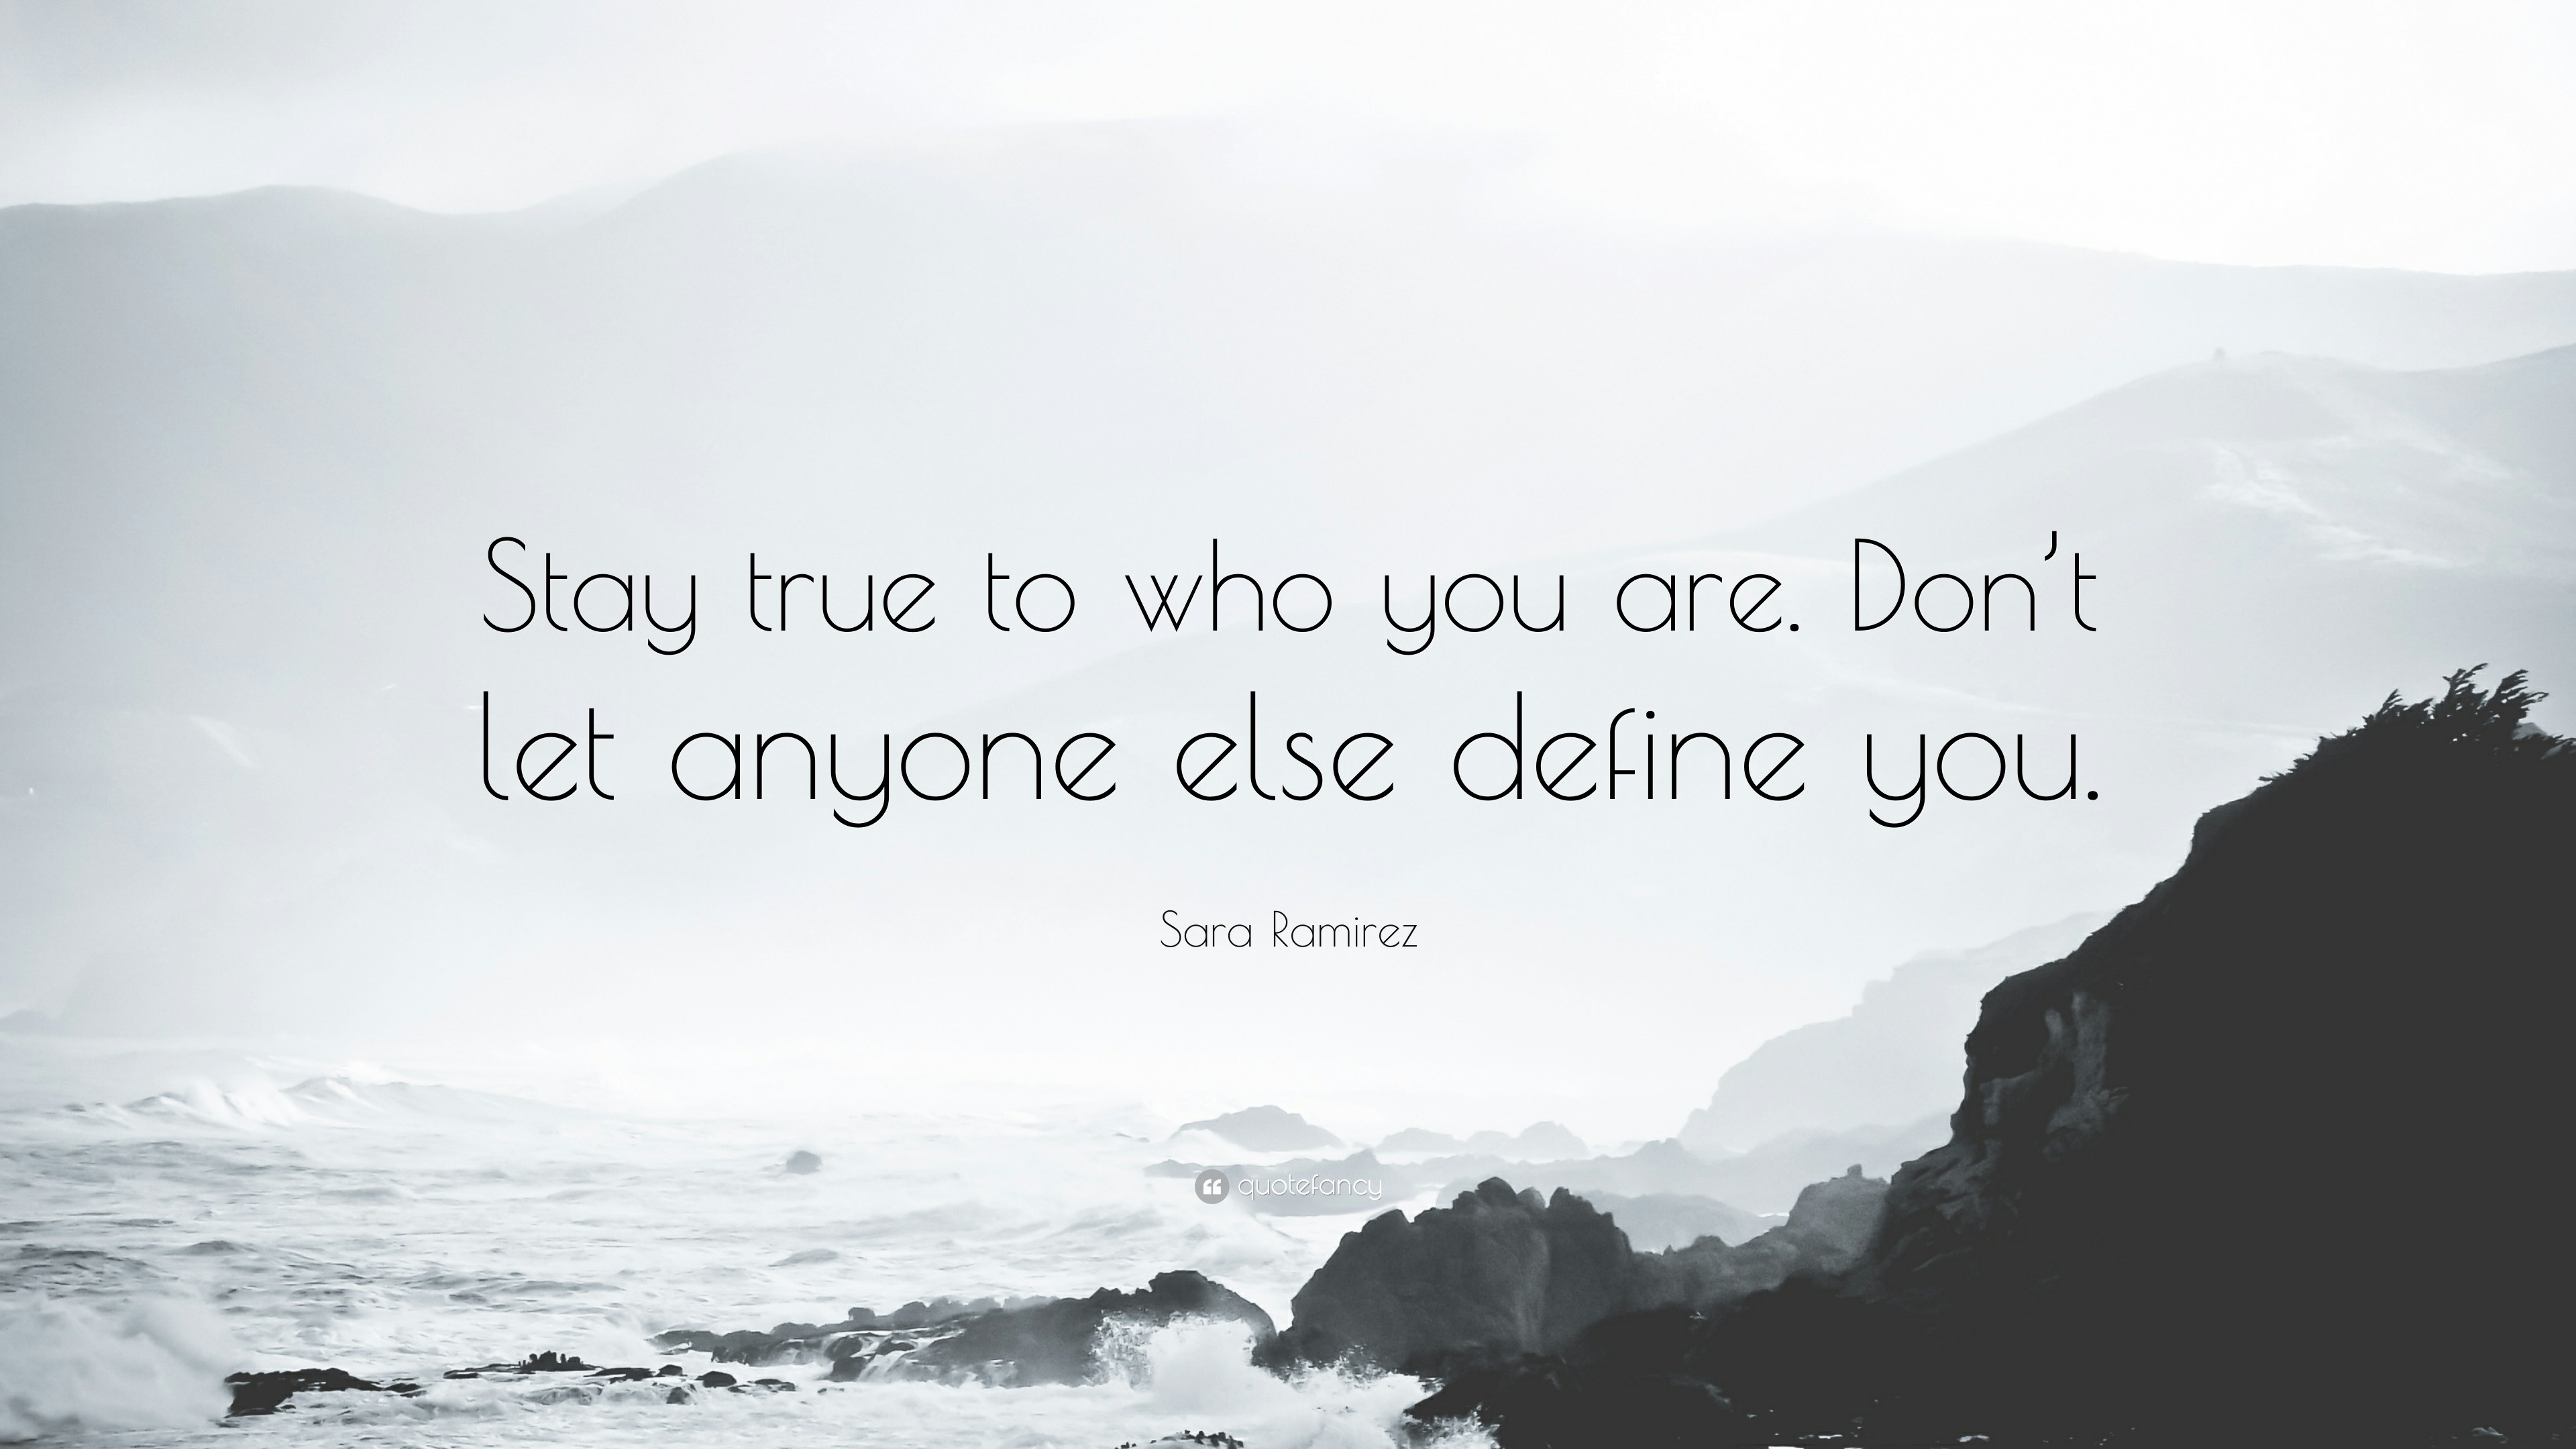 Sara Ramirez Quote: “Stay True To Who You Are. Don't Let Anyone Else Define You.”